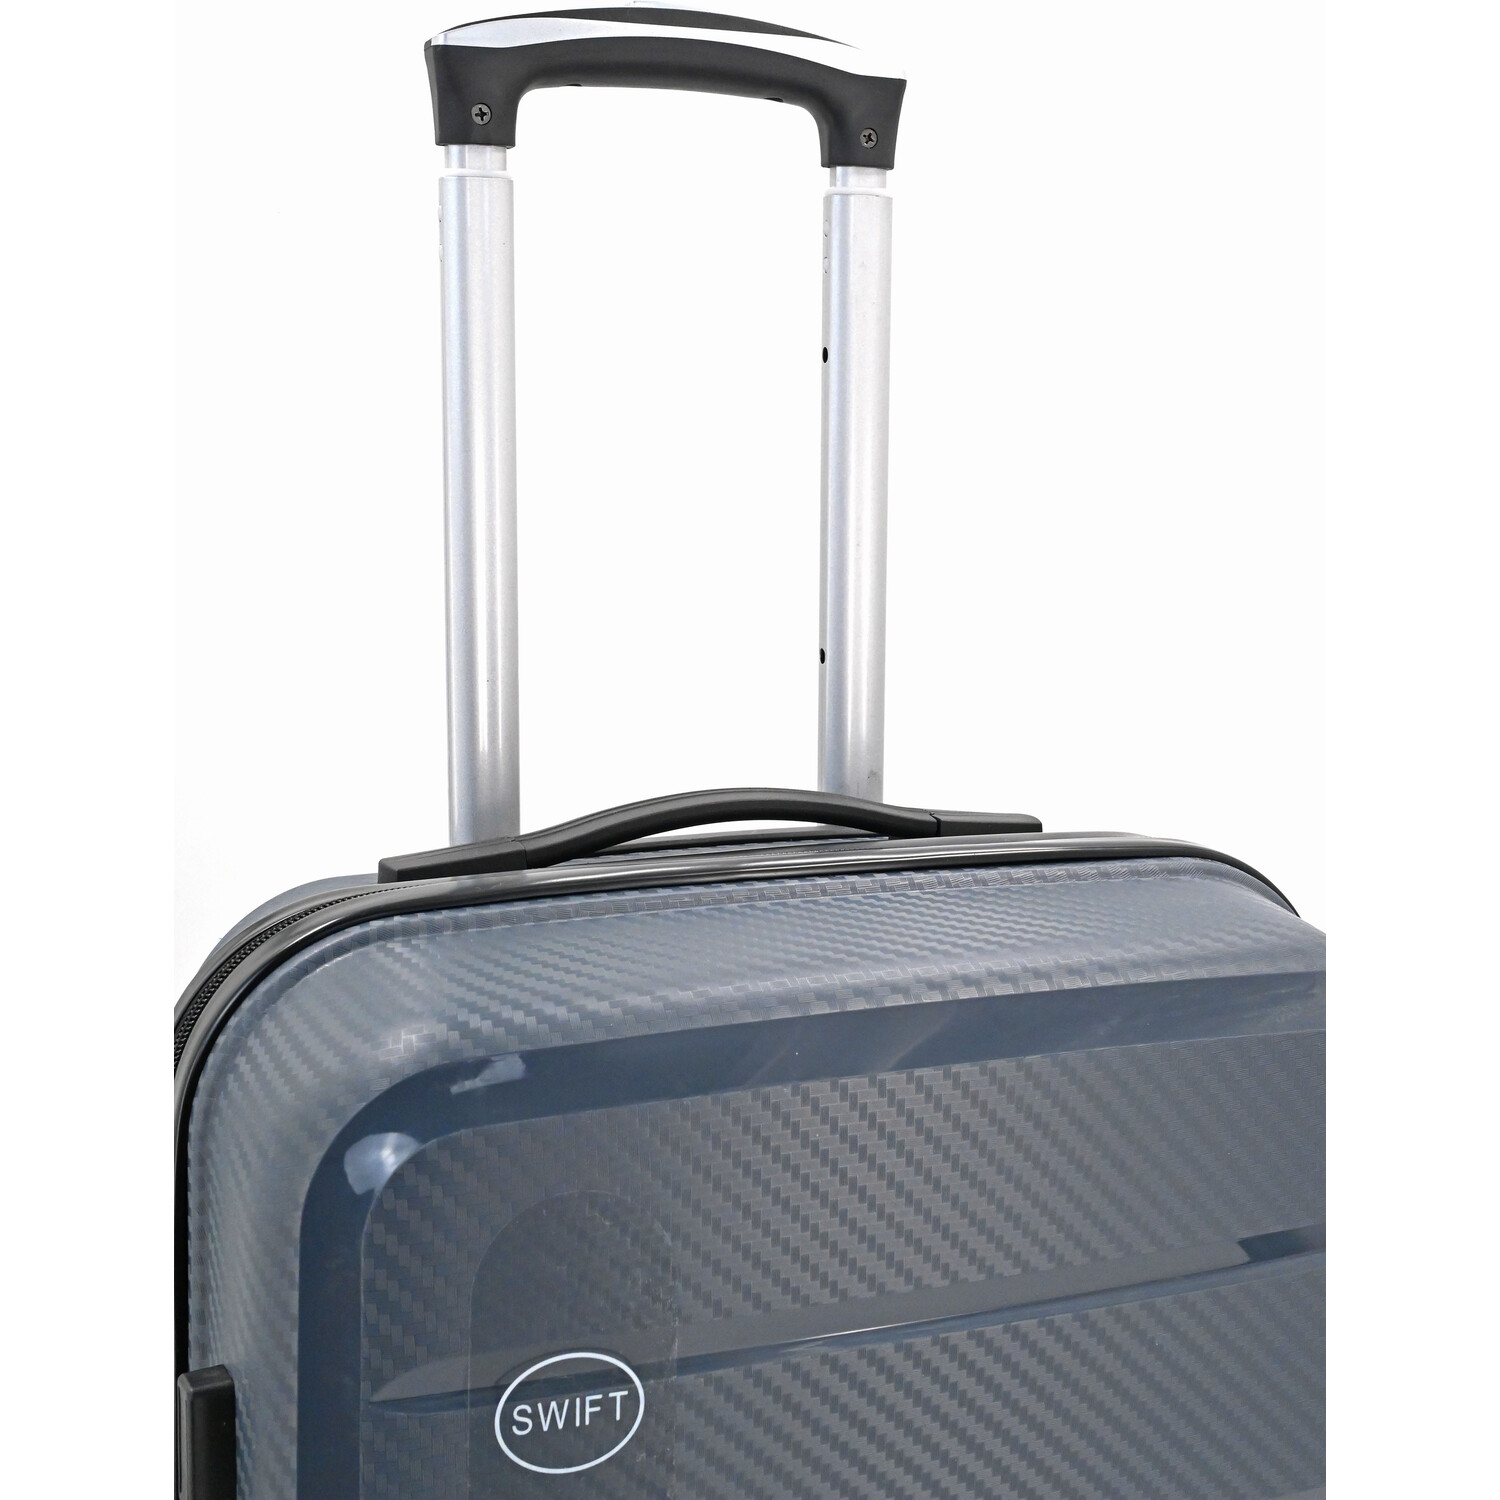 Swift Discovery Luggage Case - Grey / Cabin Case Image 4